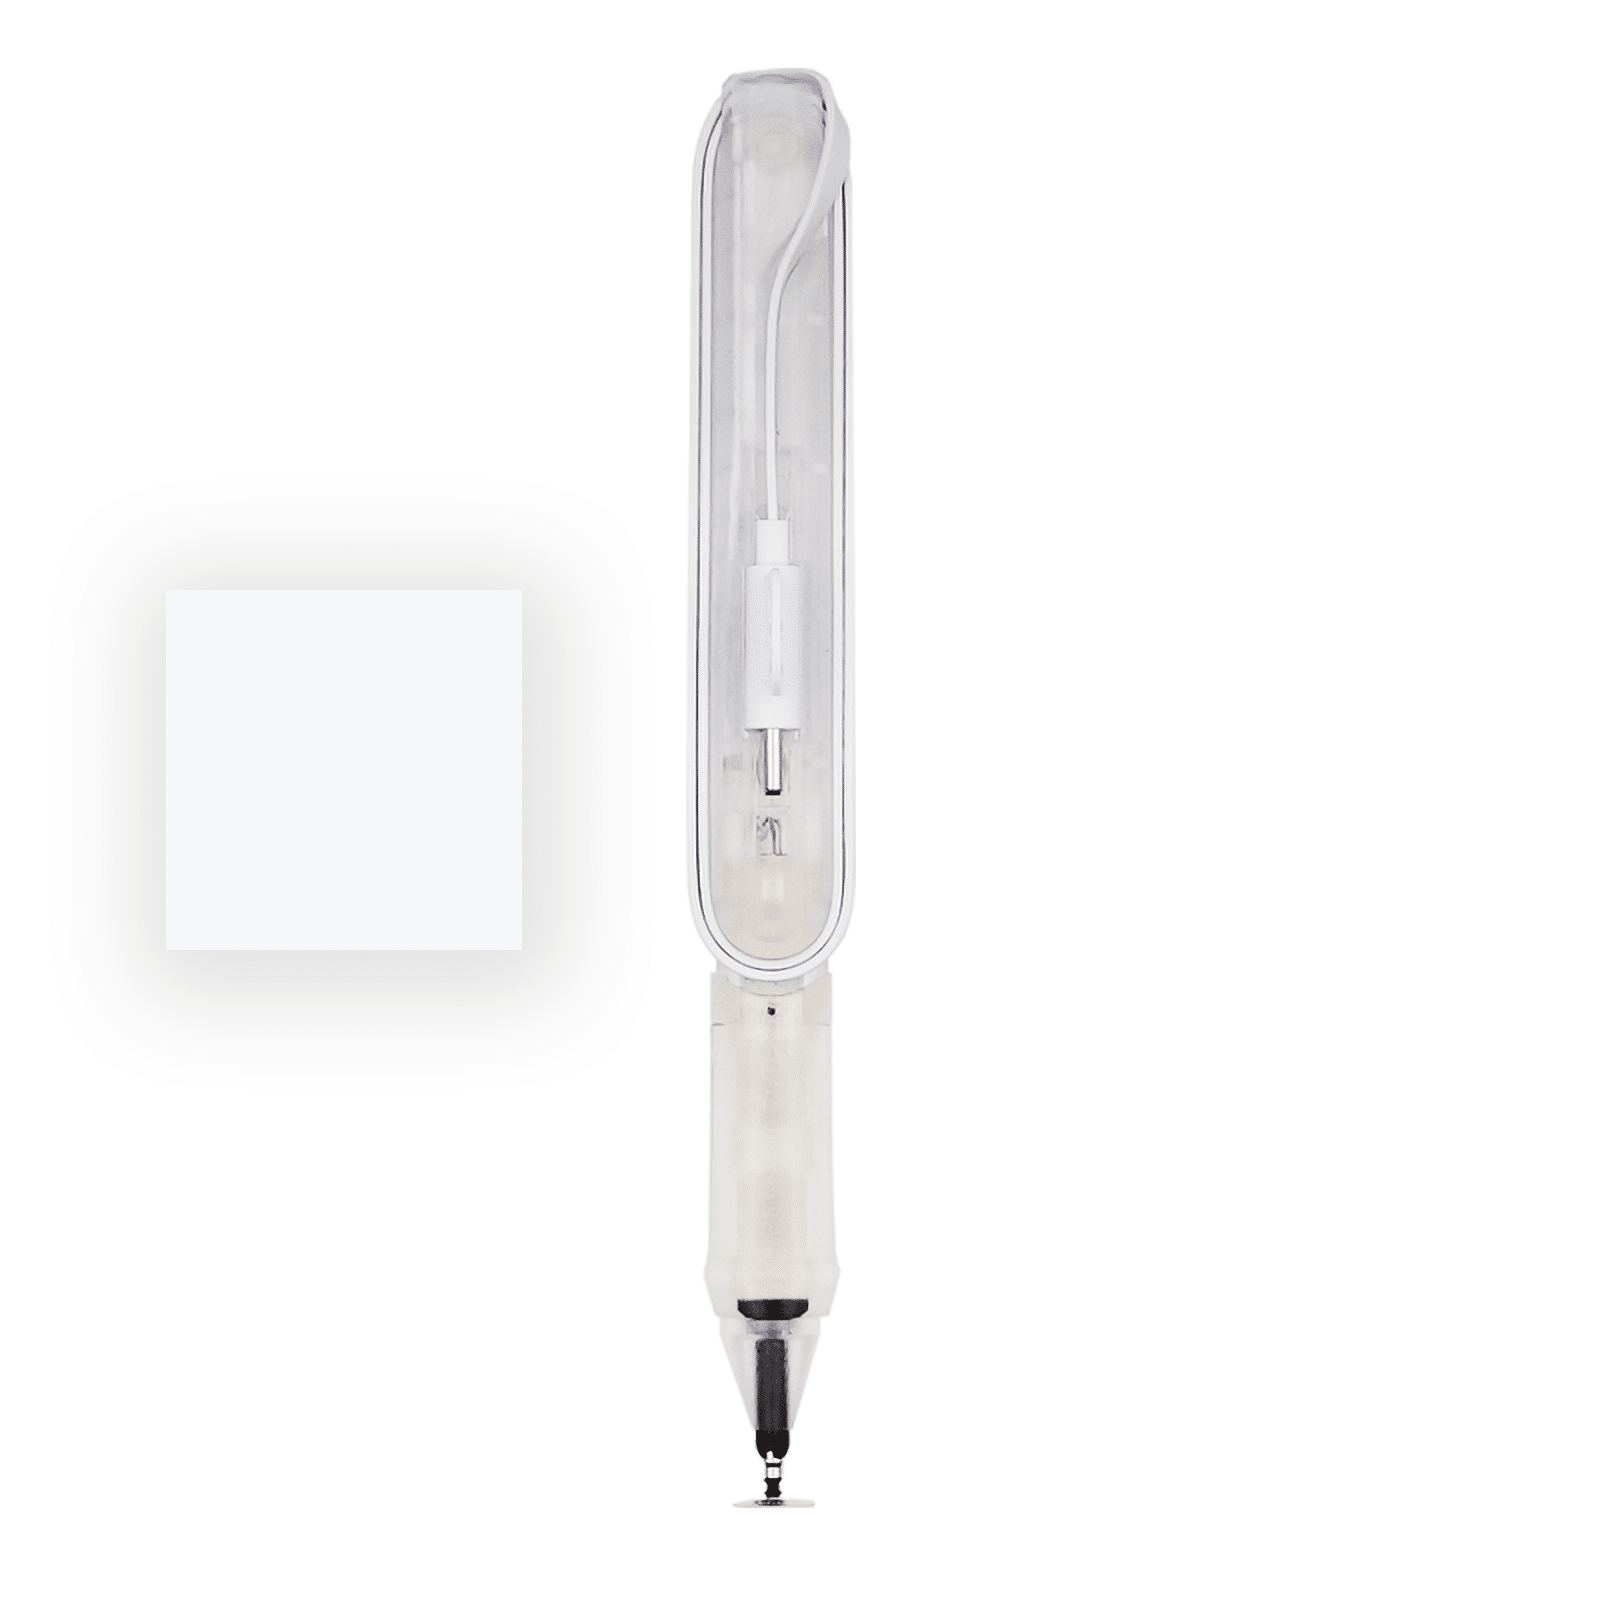 SonarPen - Pressure Sensitive Smart Stylus Pen with Palm Rejection and  Shortcut Button. Battery-Less. Compatible with Apple  iPad/iPhone/Android/Switch/Chromebook